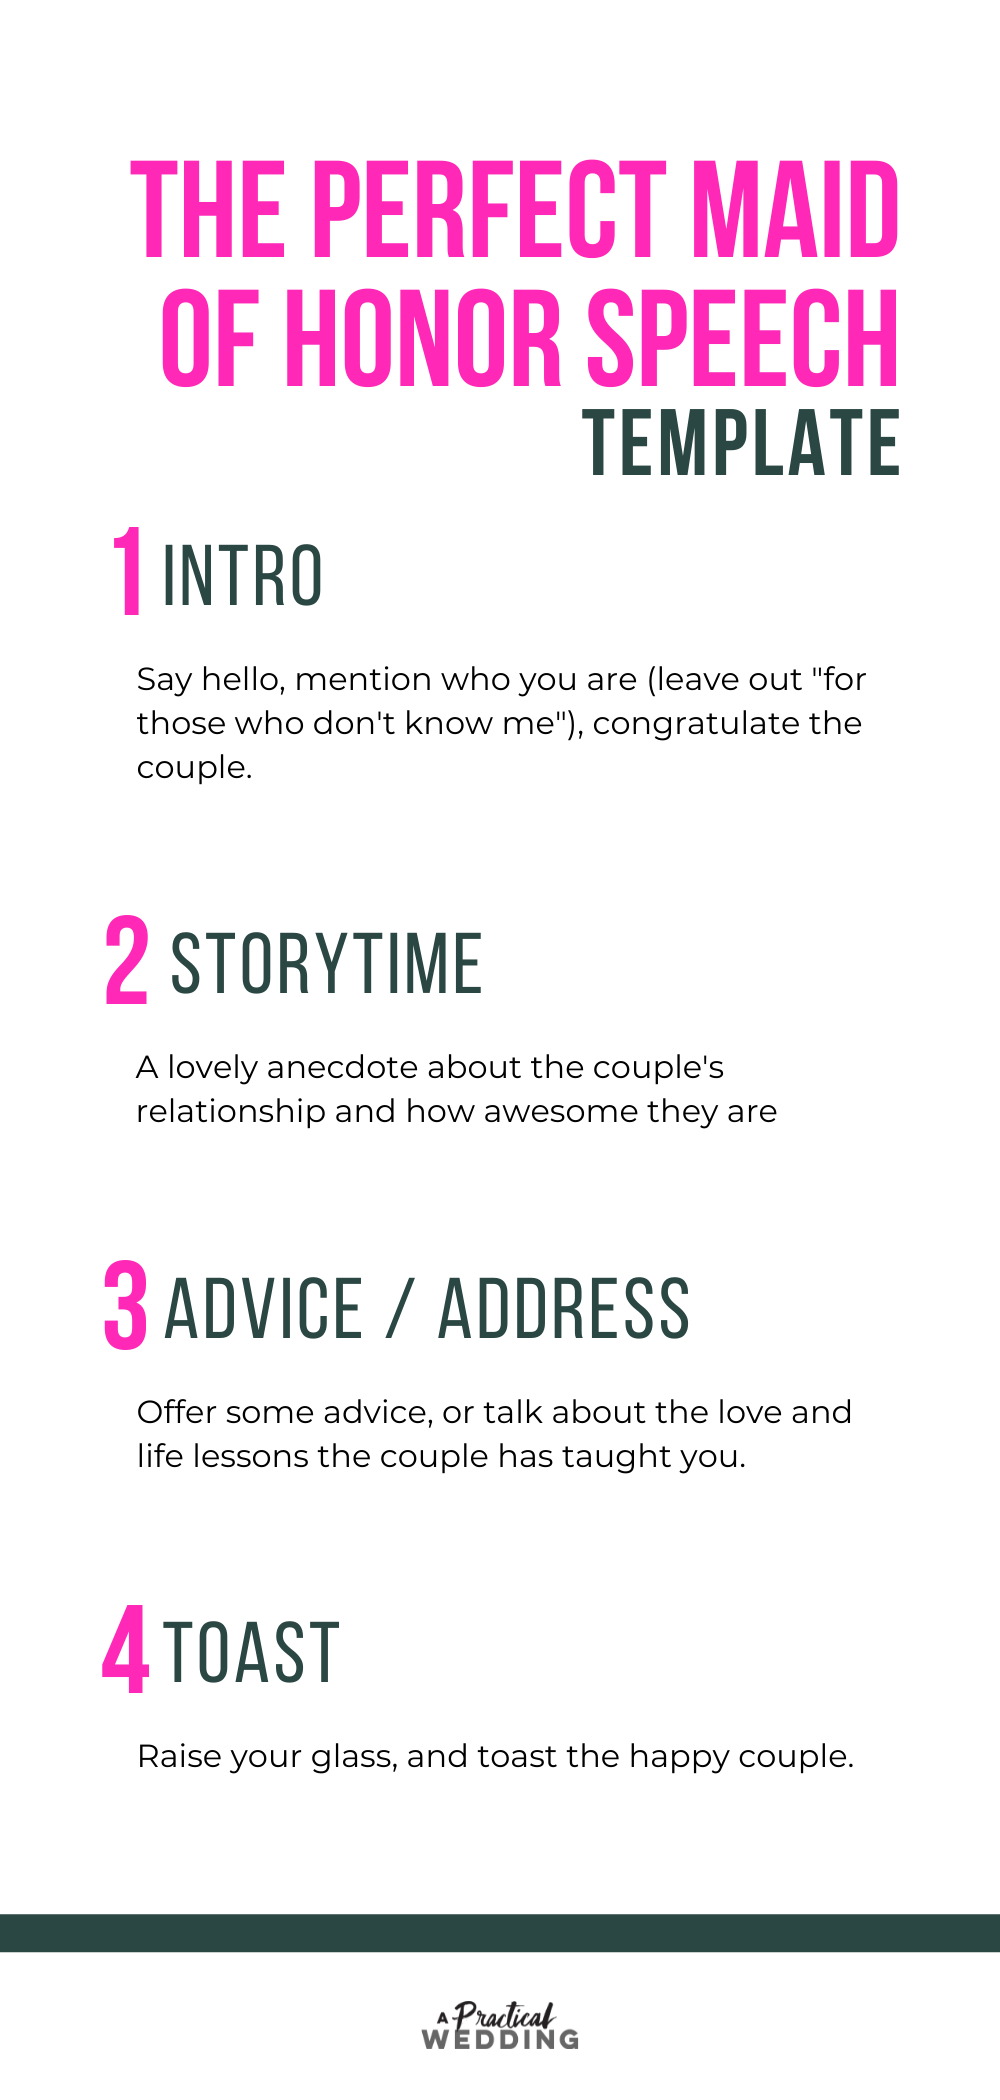 MOH Speech template Pinterest Graphic - Maid of Honor Speech: How Write The Best Toast